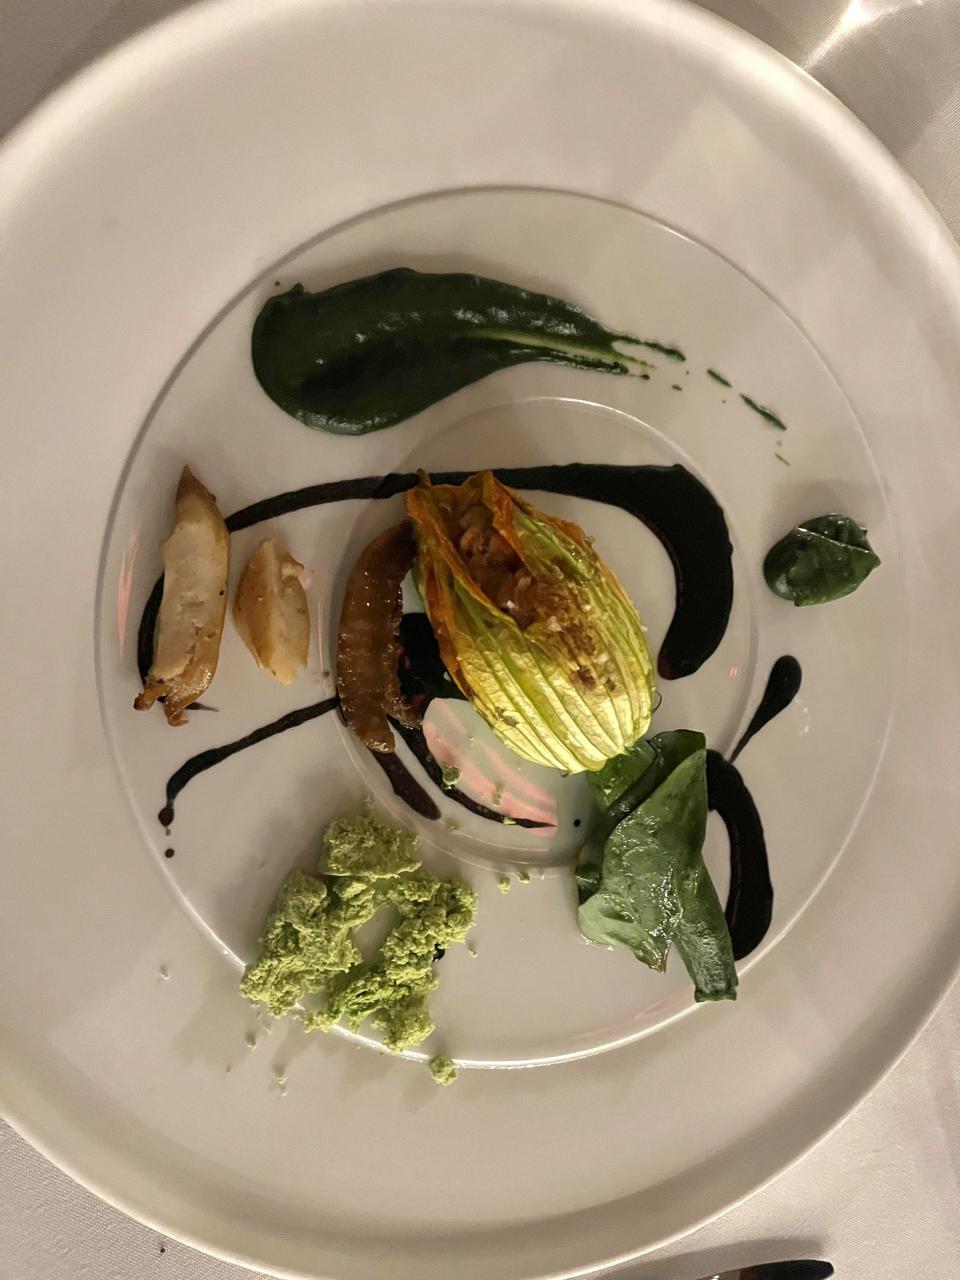 A course of abalone, with ratatouille-stuffed squash.